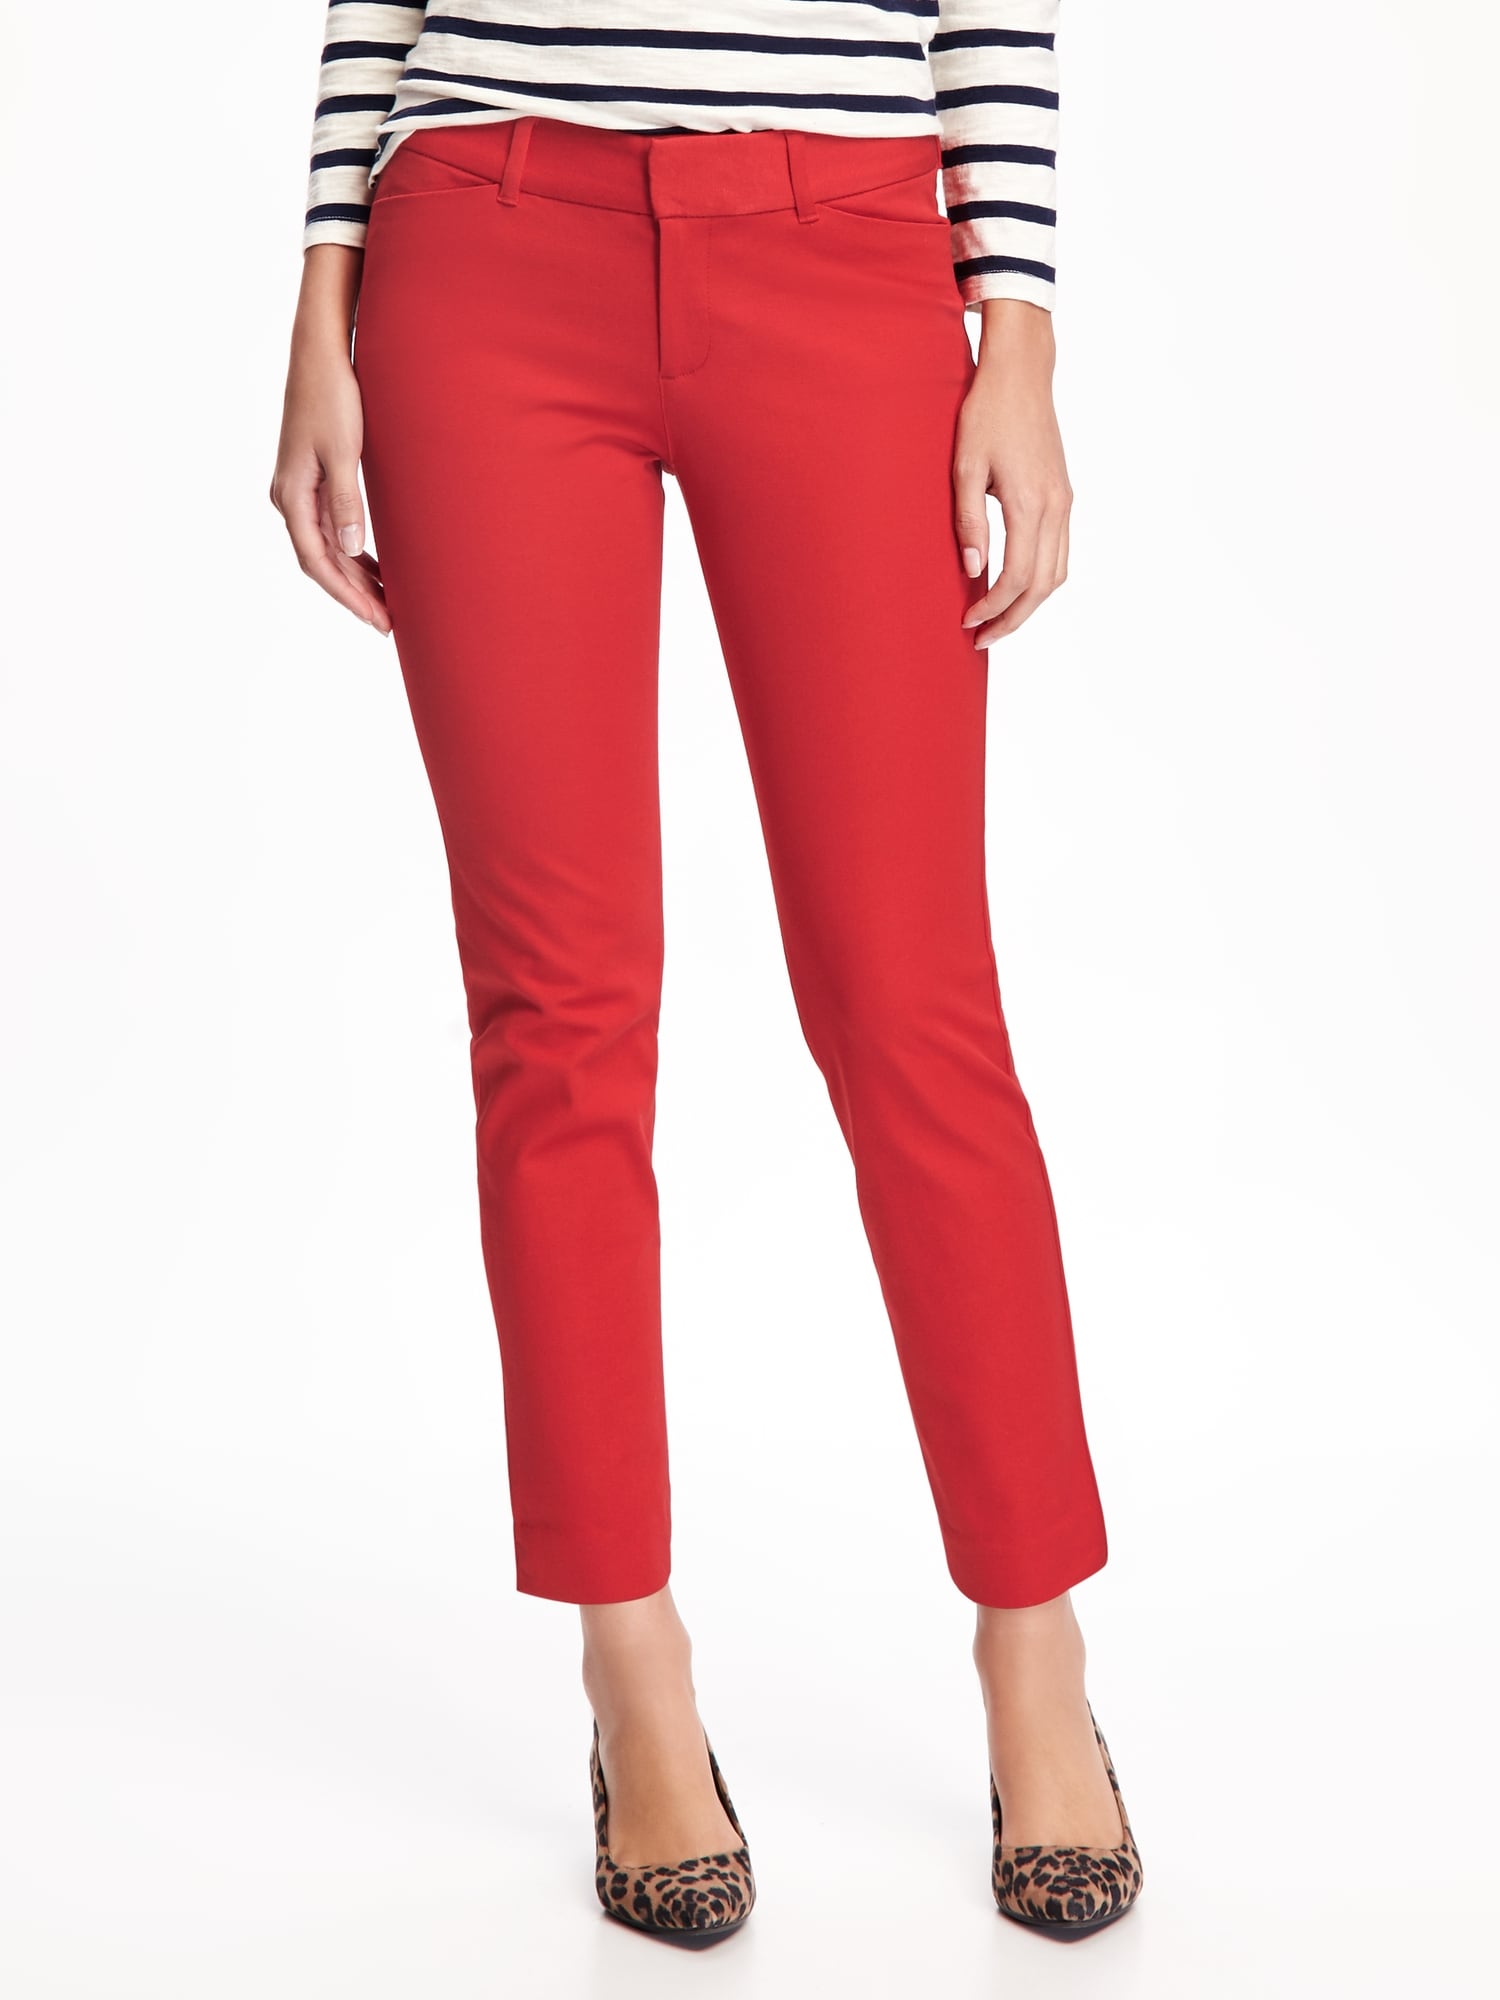 Old Navy Plus Size High Rise Pixie Ankle Pants, Pants